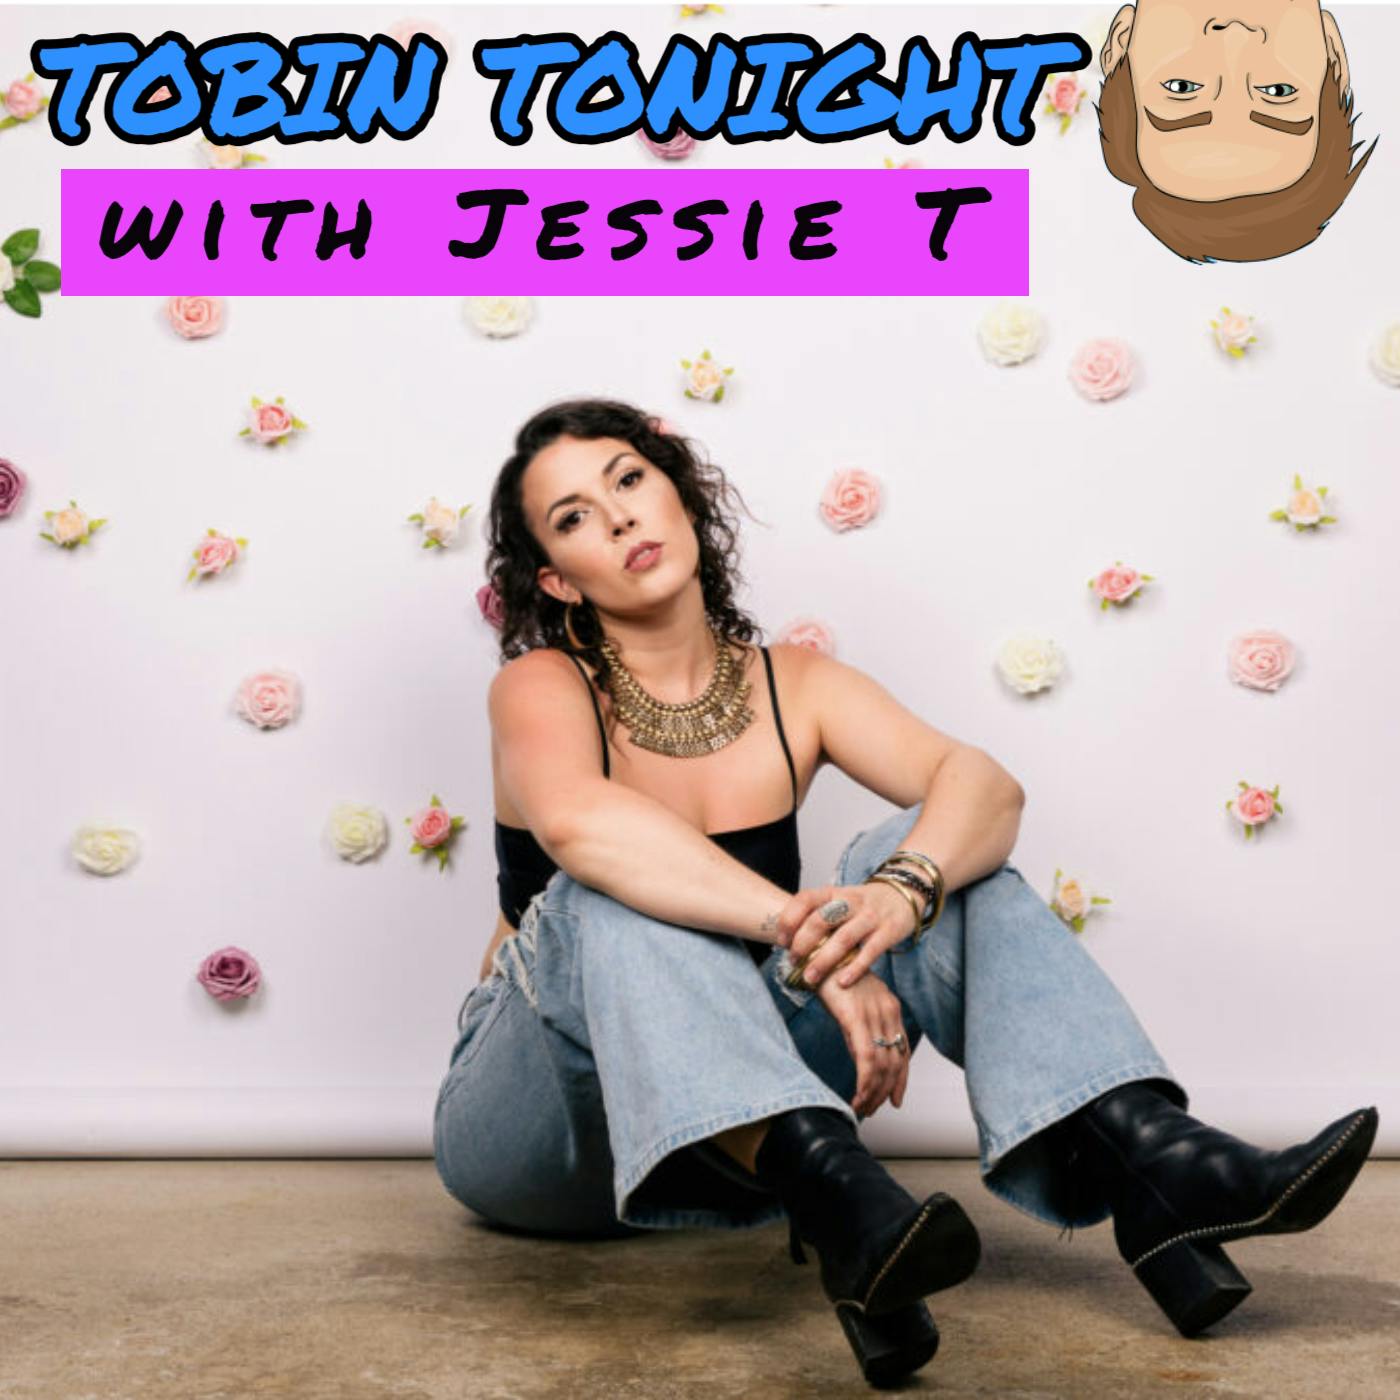 Jessie T: The T stands for Talent